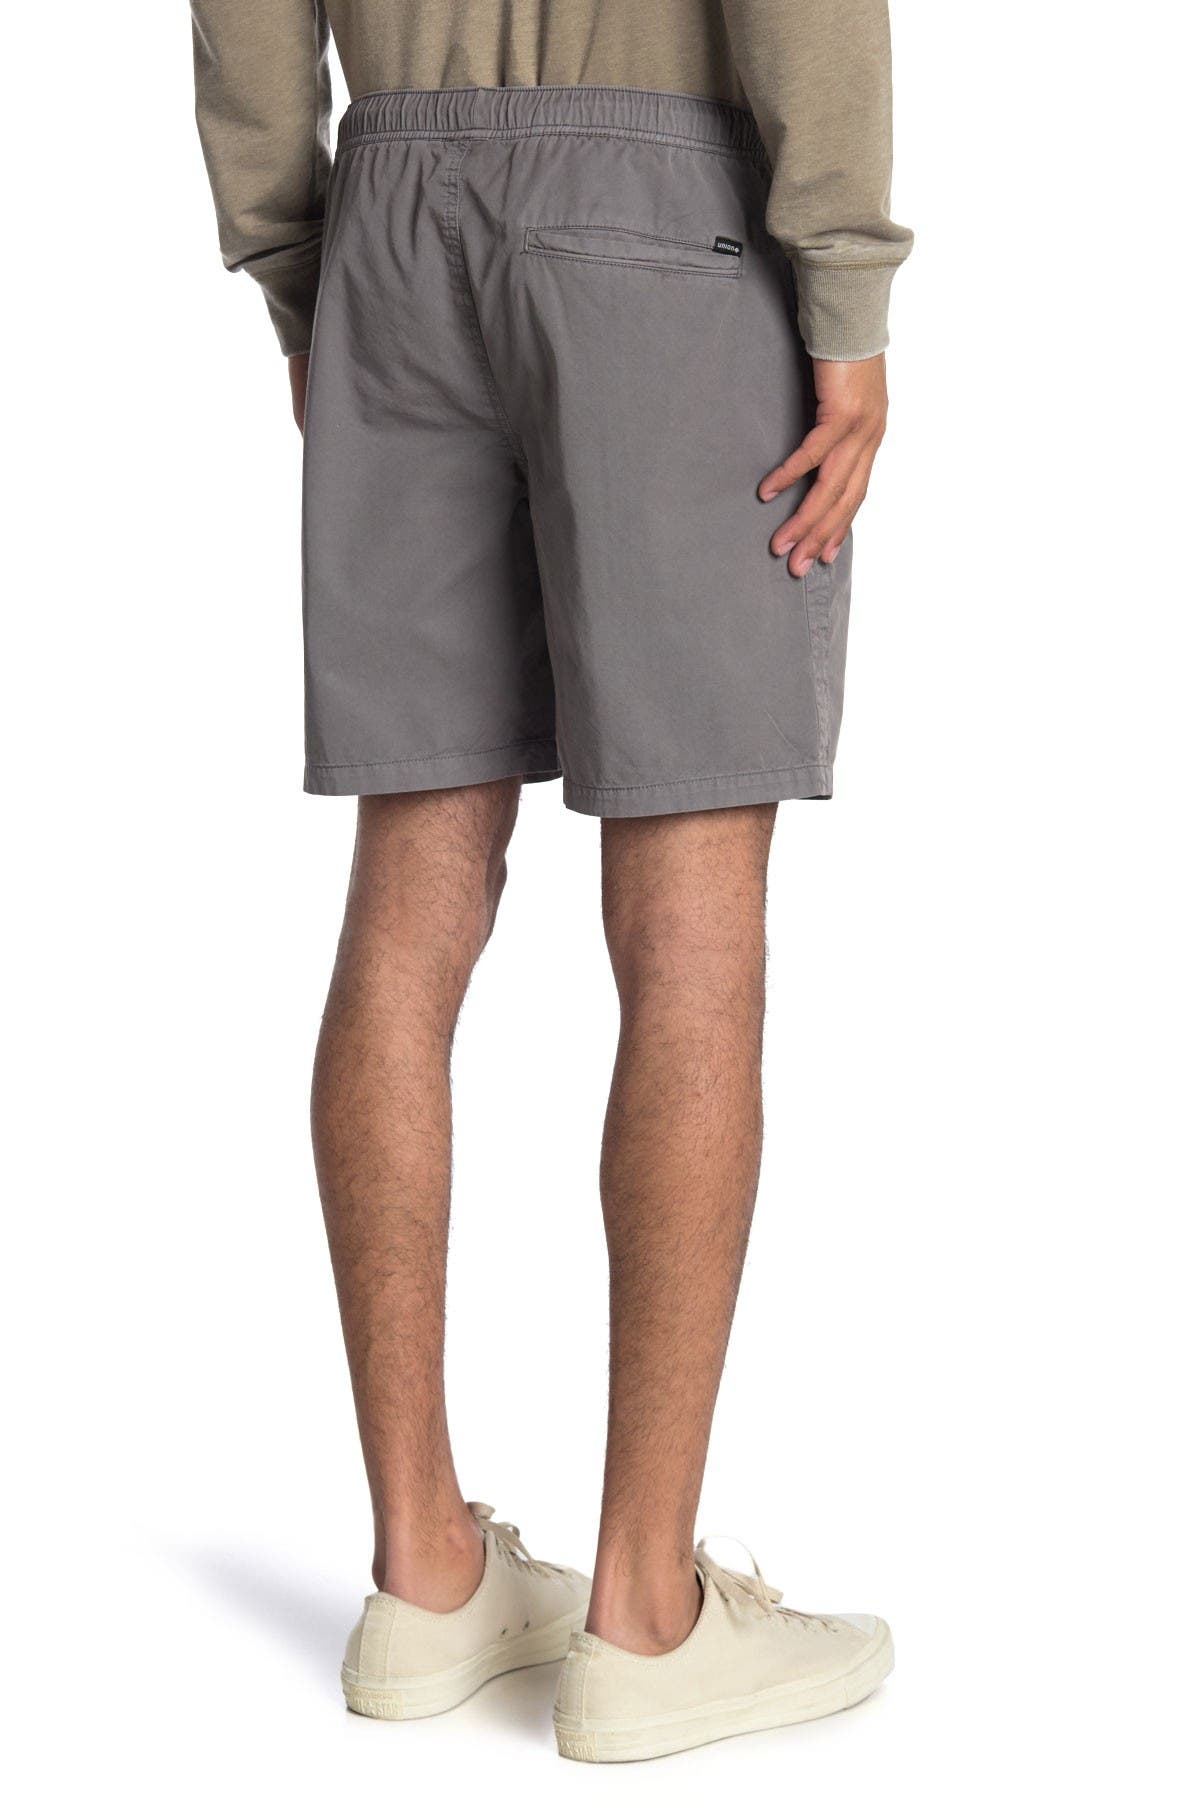 Union Denim Sun-sational Pull-on Woven Shorts In Open Grey16